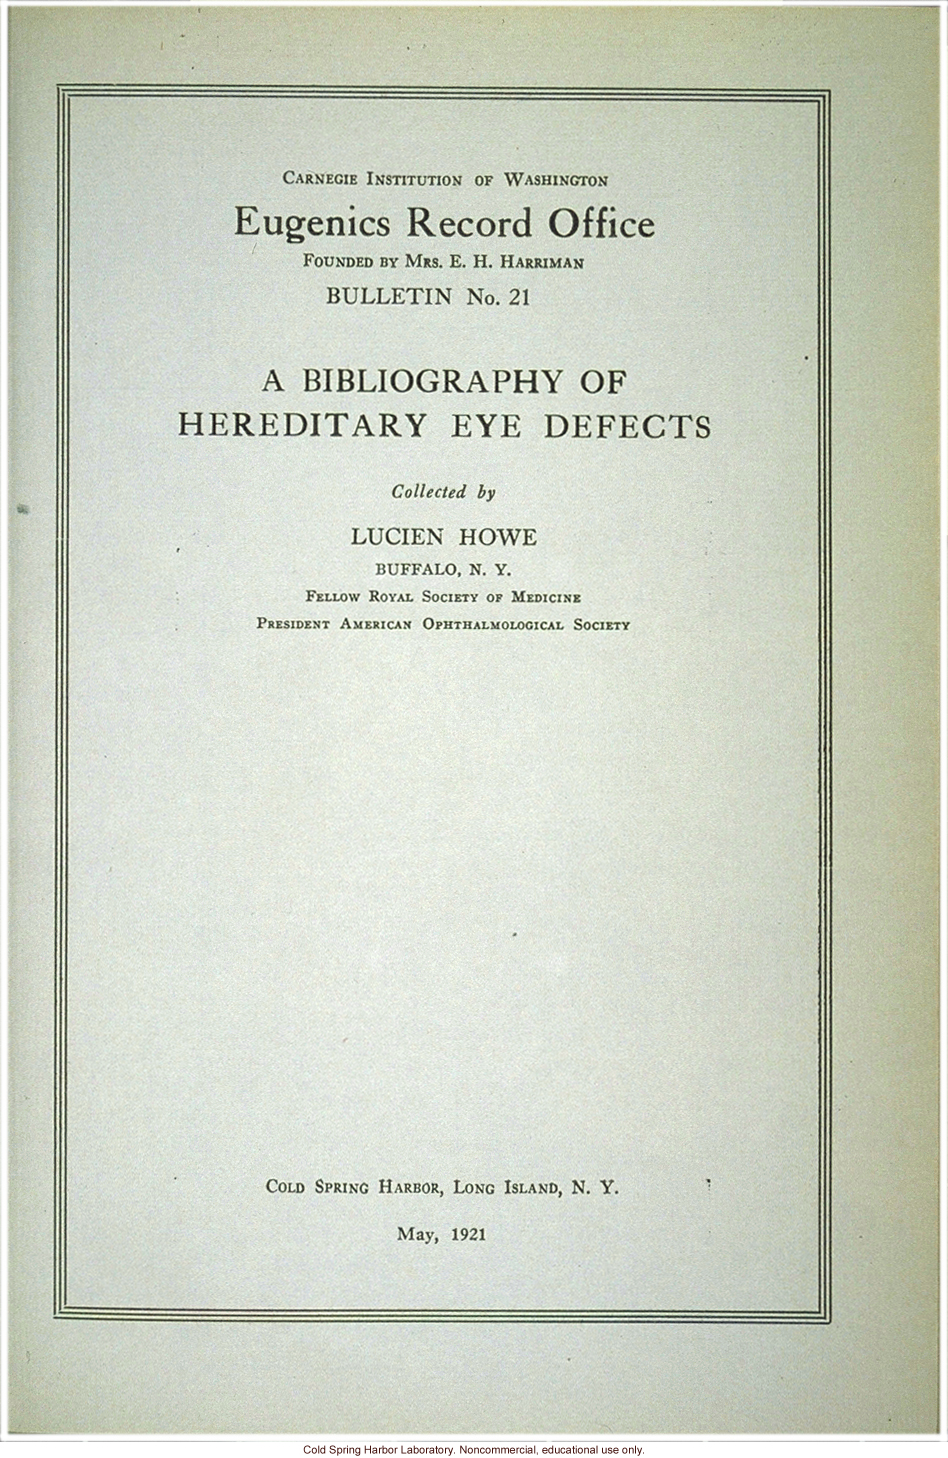 &quote;A bibliography of hereditary eye defects,&quote; by L. Howe